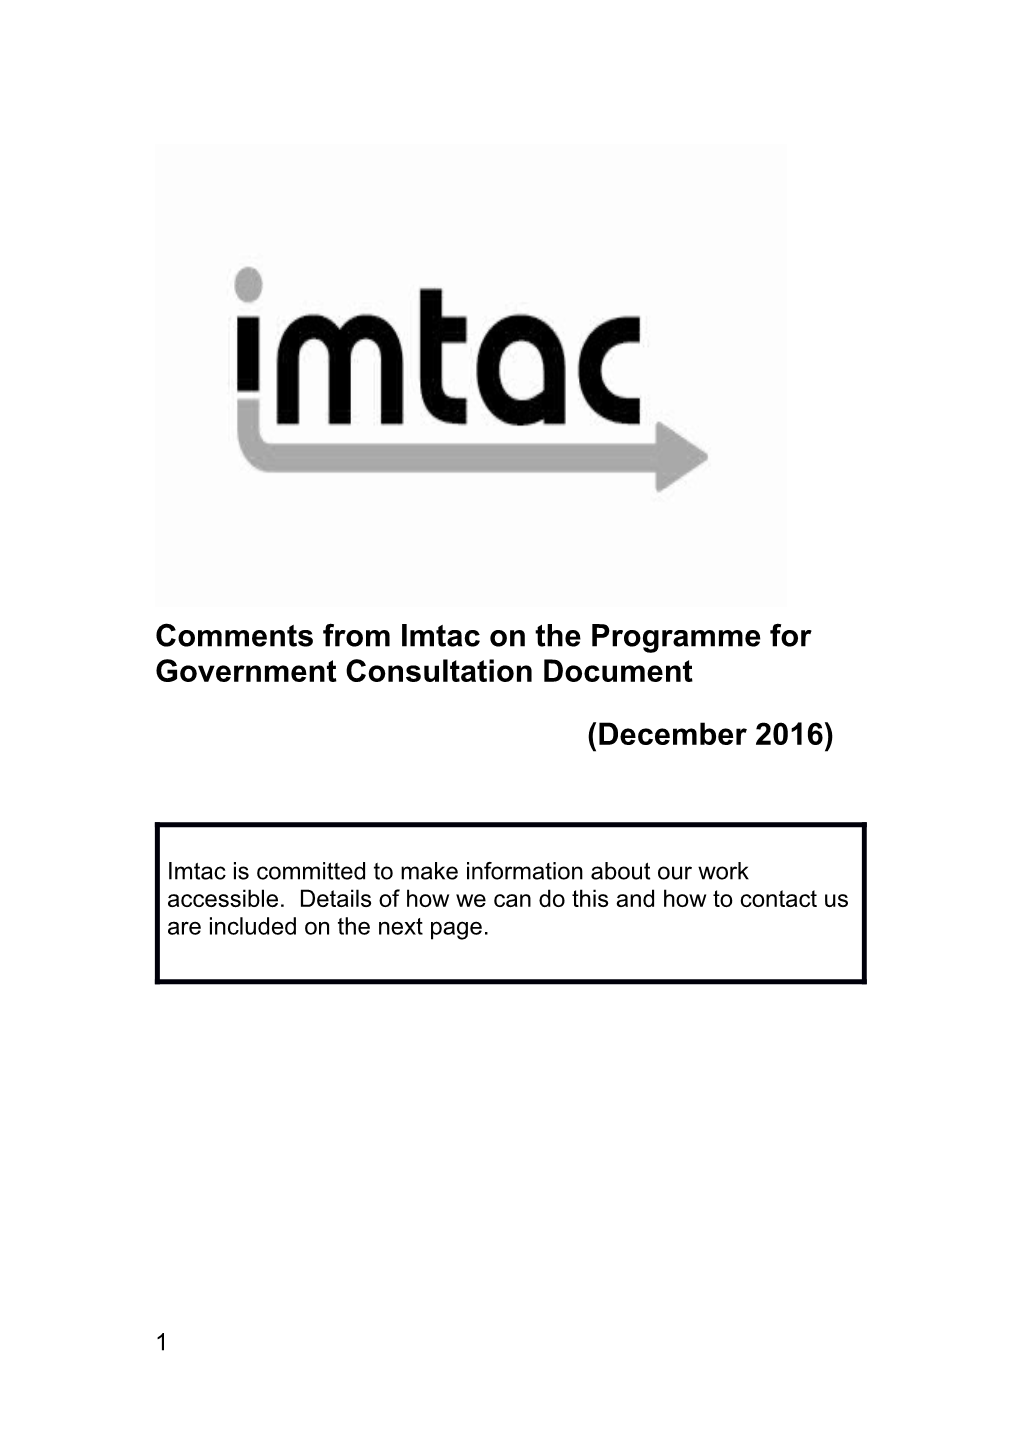 Comments from Imtac on the Programme for Government Consultation Document